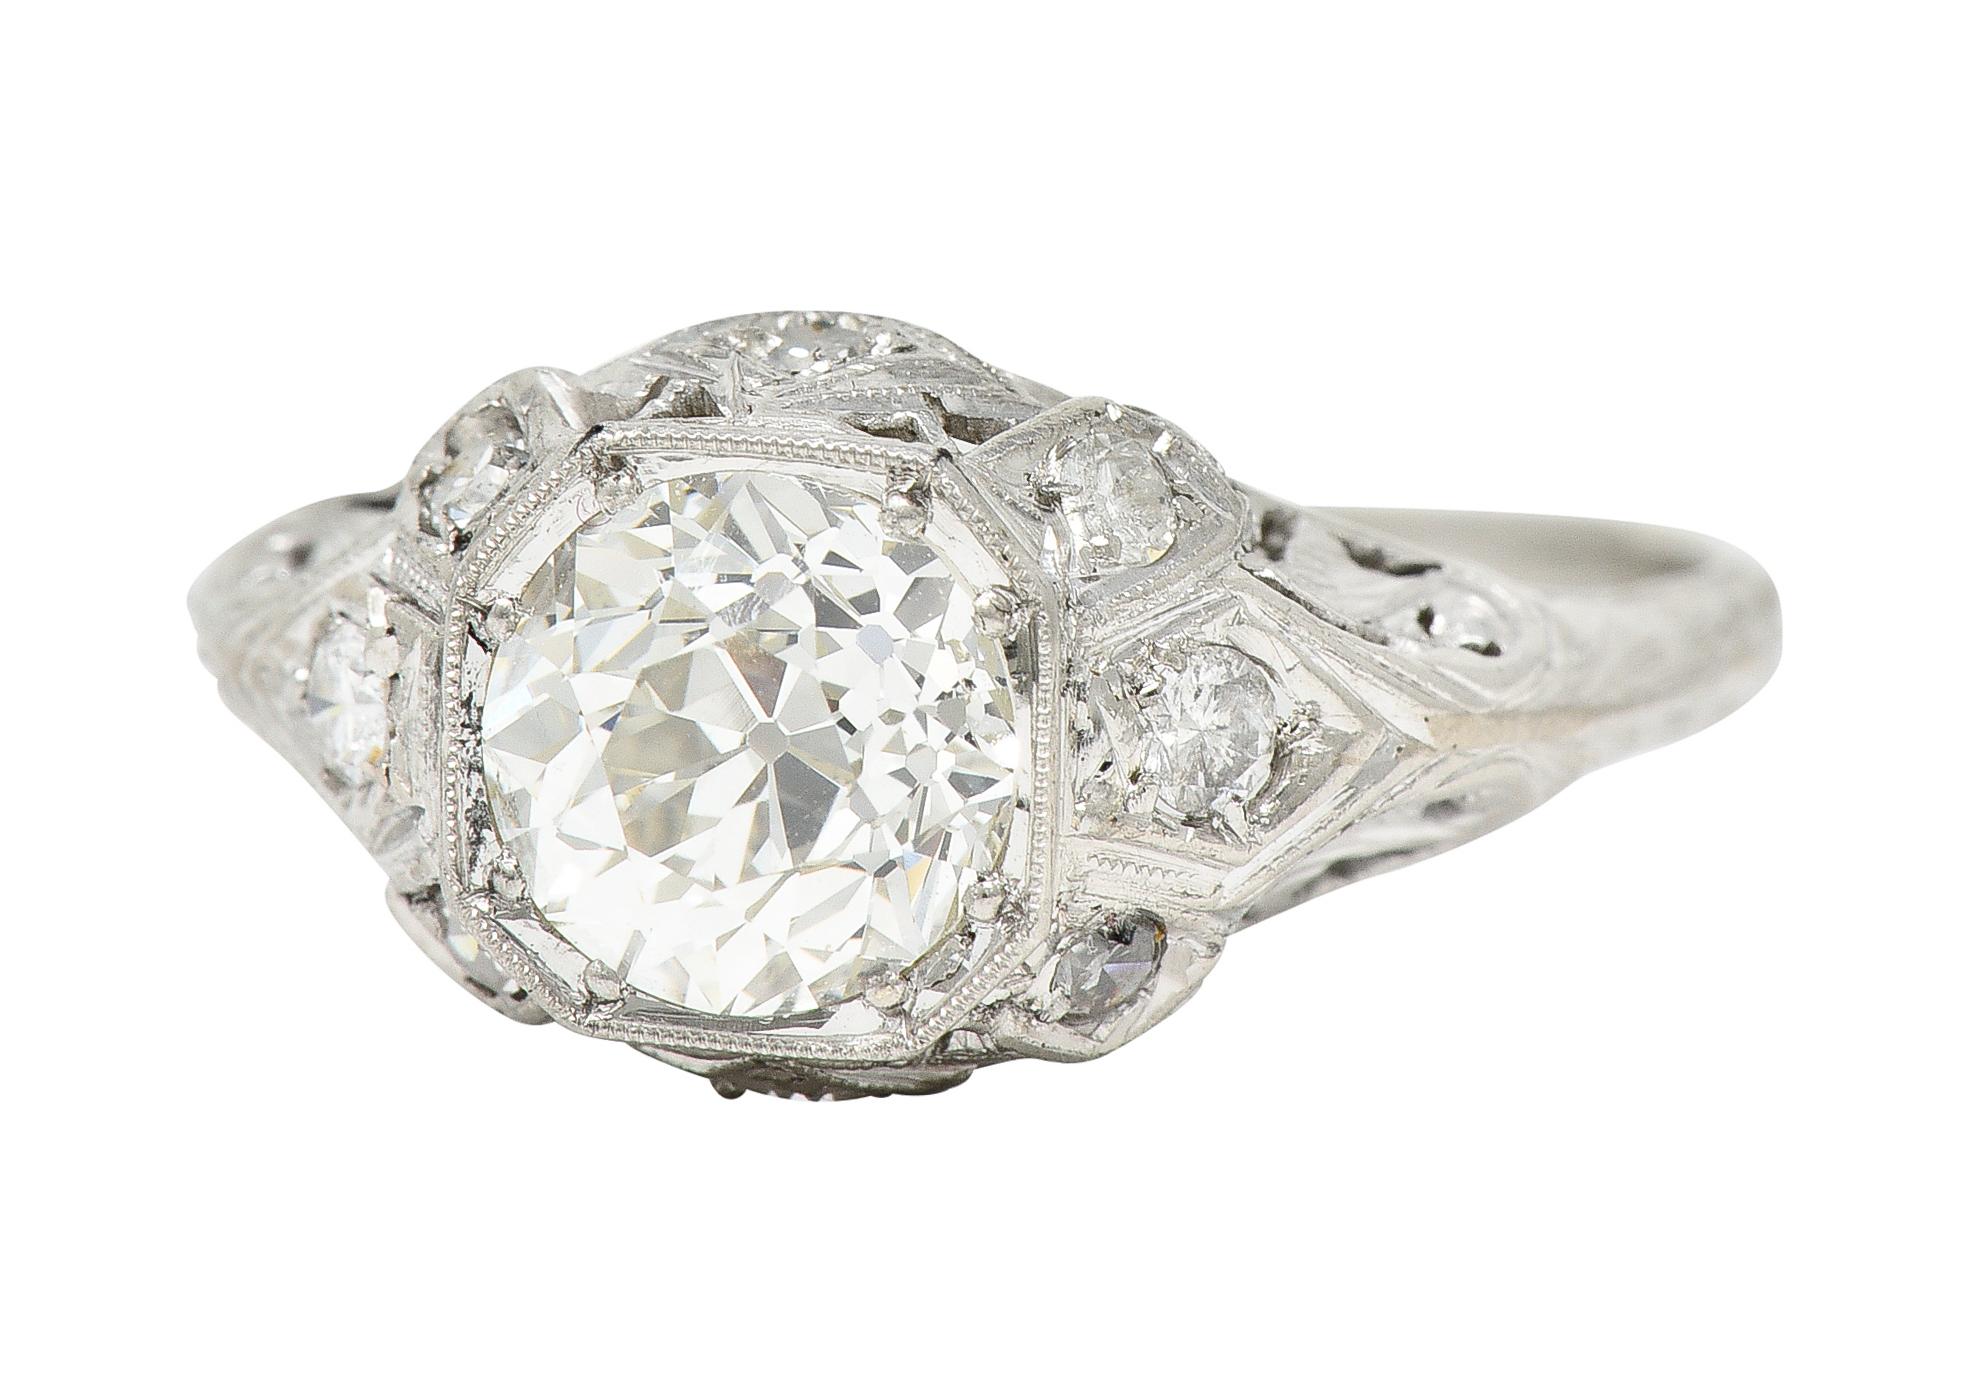 Edwardian Old European 1.64 Carats Diamond Platinum Foliate Engagement Ring In Excellent Condition For Sale In Philadelphia, PA